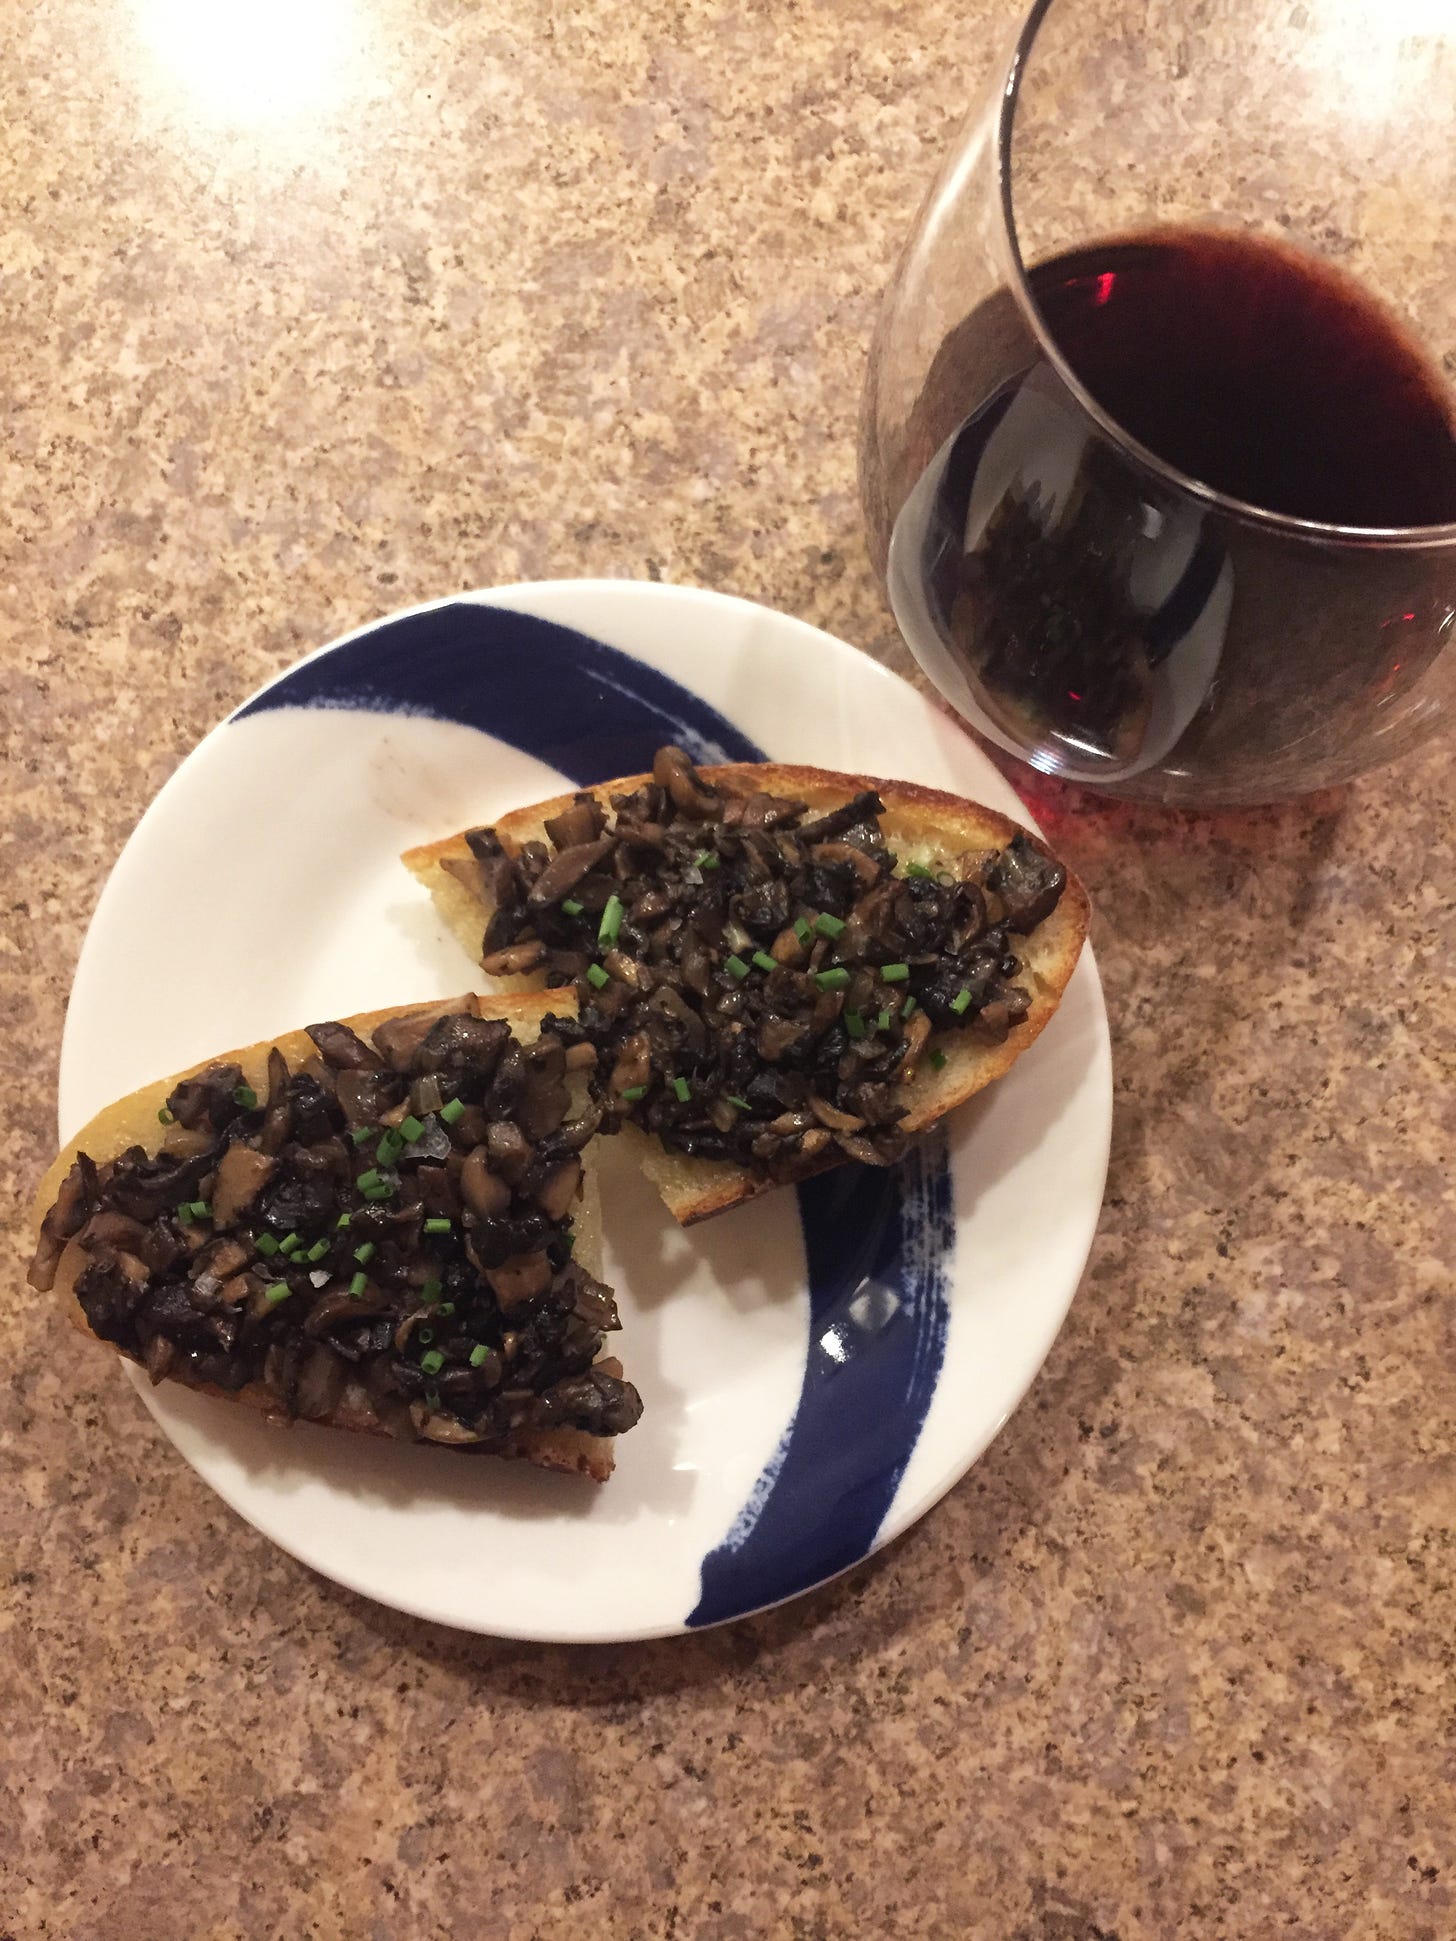 Two halves of a large slice of sourdough, each topped with the chopped fried mushrooms described above, and sprinkled with chives. A stemless glass of red wine sits at the upper right edge of the plate.